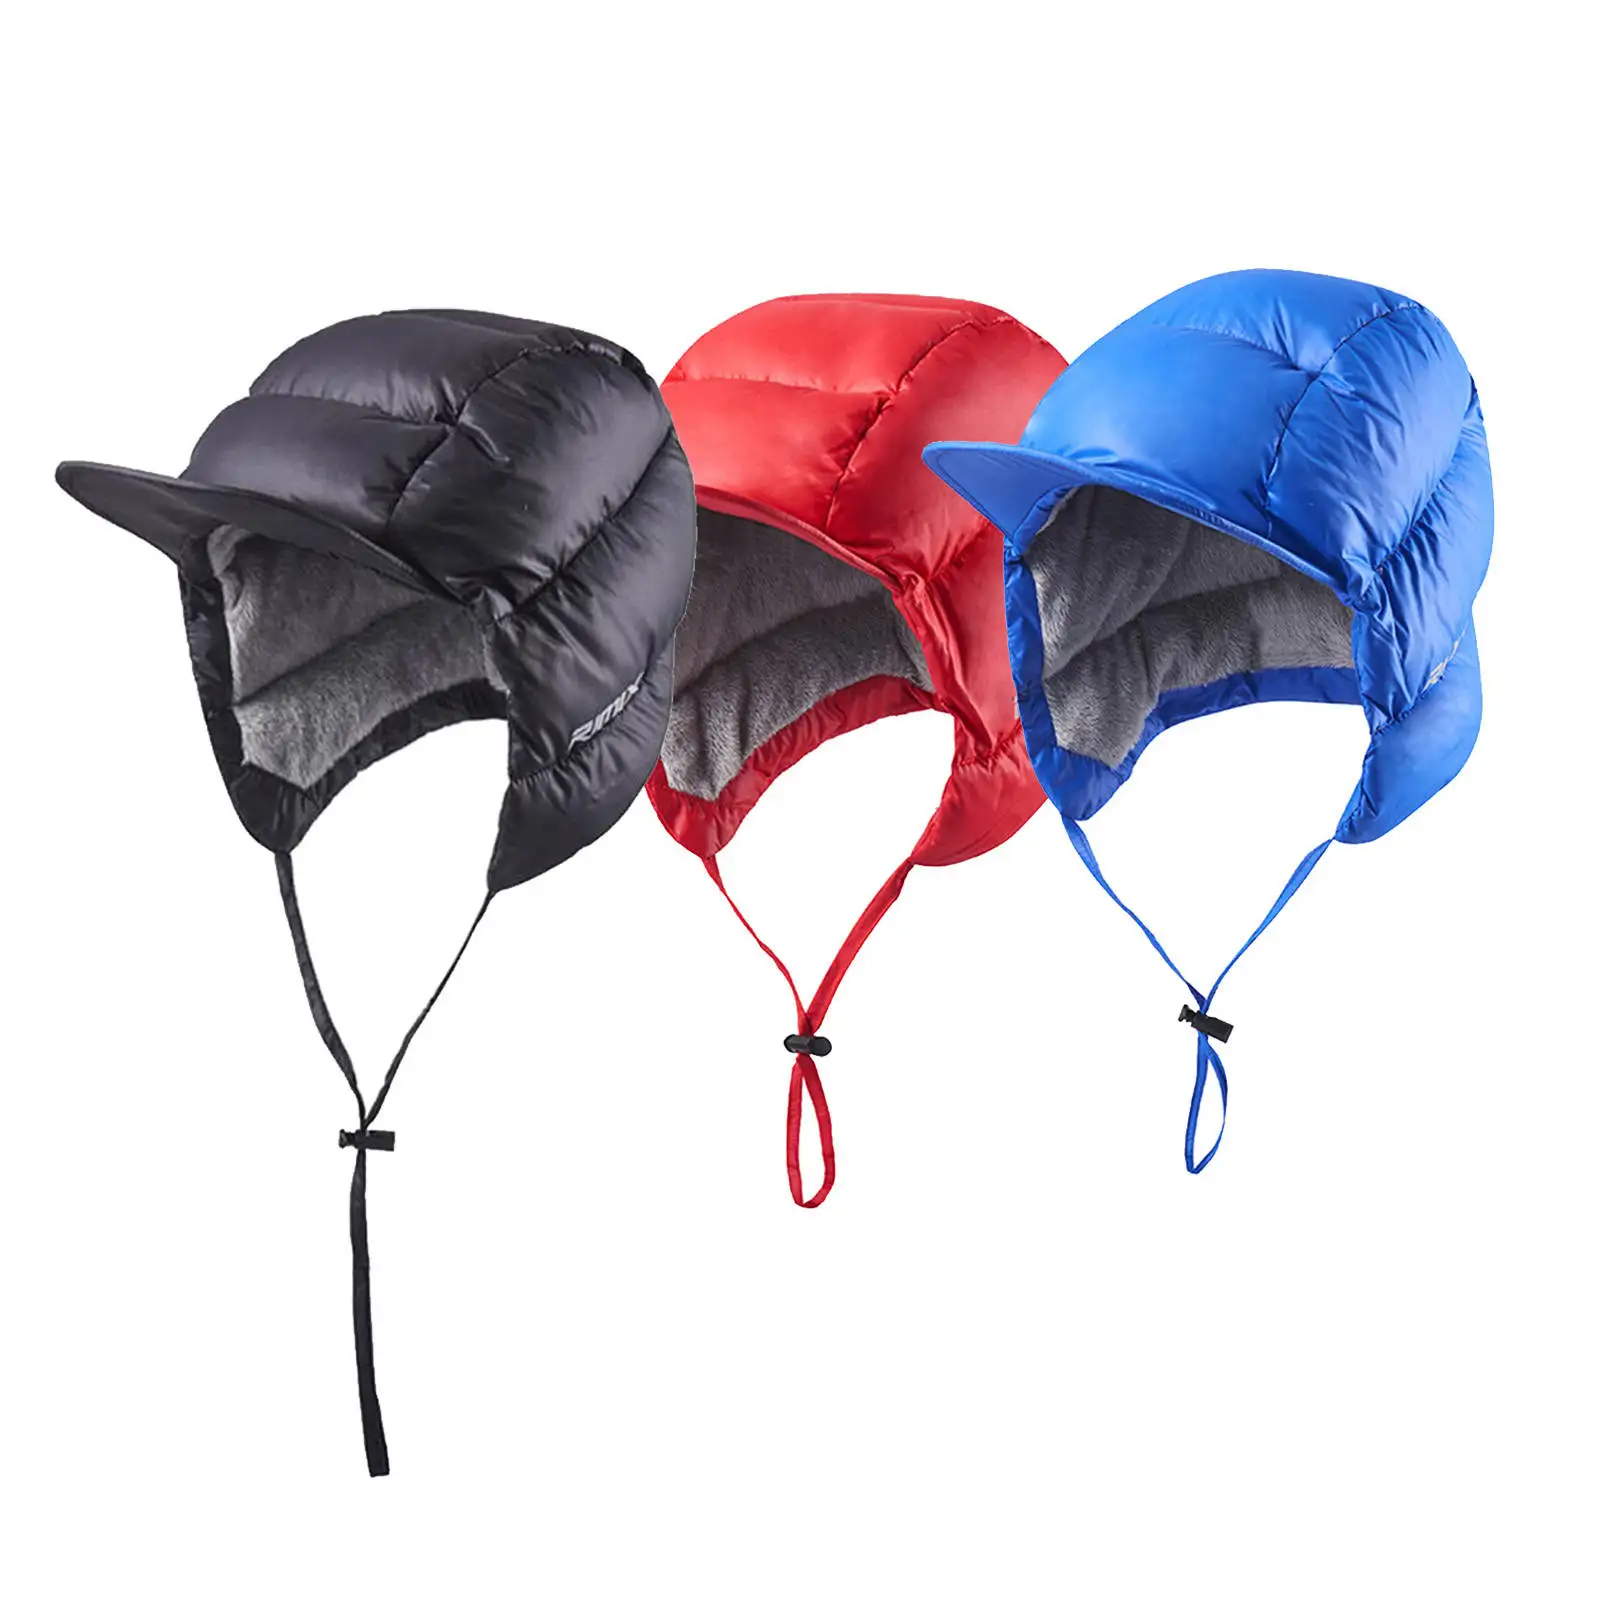 Cycling Hat Sports Winter Soft with Ear Flaps Running Outdoor Fleece Lined Women Men Caps